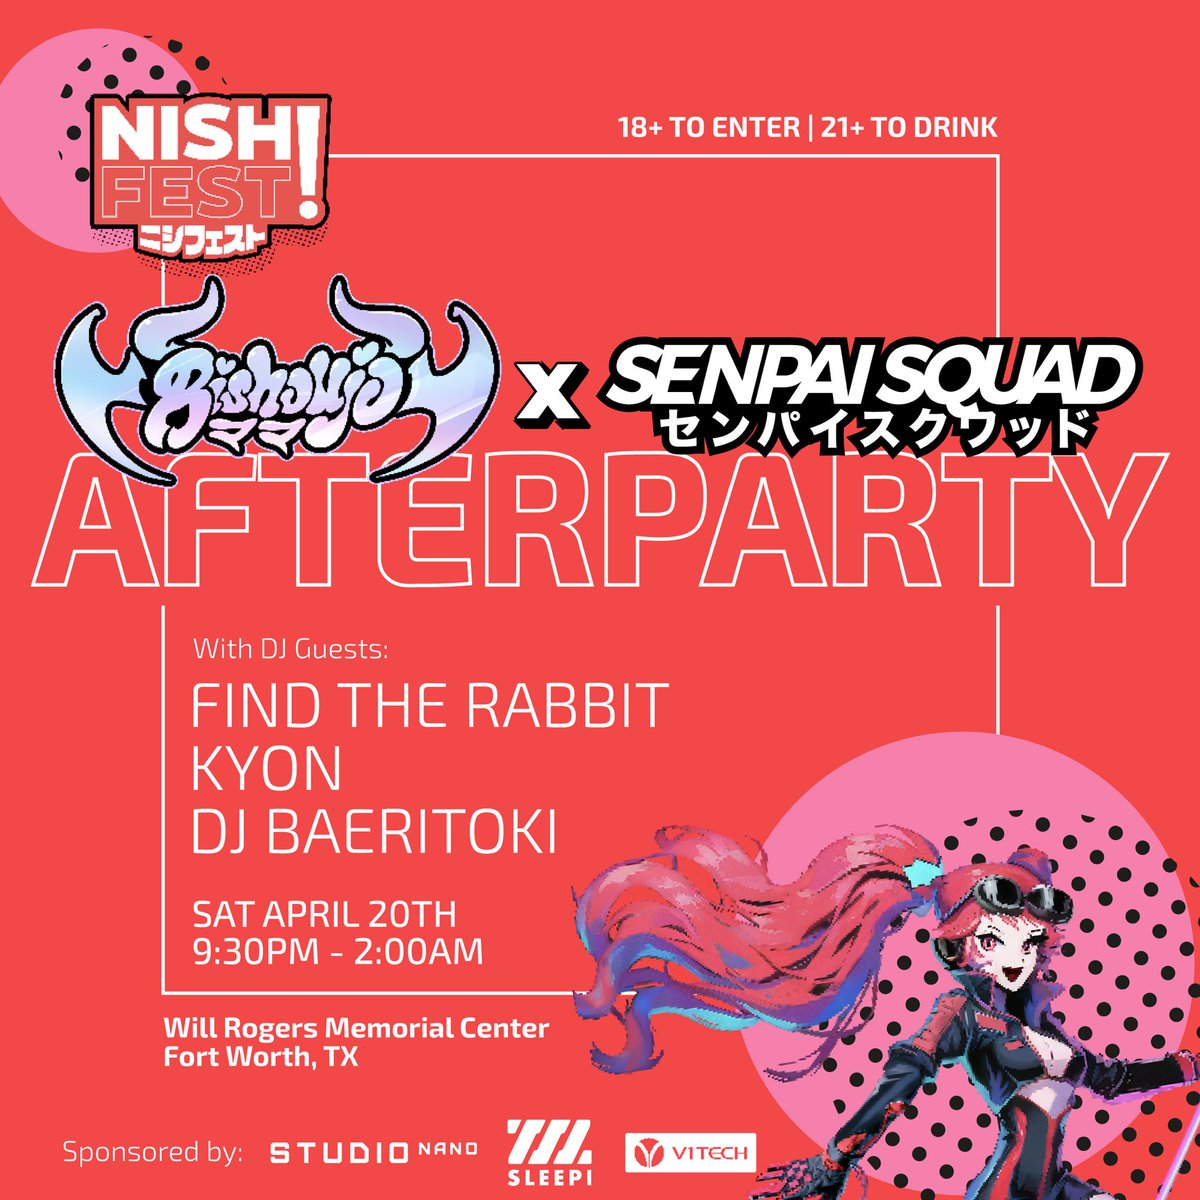 Let’s party! When the convention doors close on Saturday, the party goes until 2:00AM at our annual Nishi Fest After Party - in partnership with @SenpaiSquadNet and @BishoujoMom! Stay tuned for our surprise DJ announcement. Must be 18+ to enter and 21+ to drink. See you there!